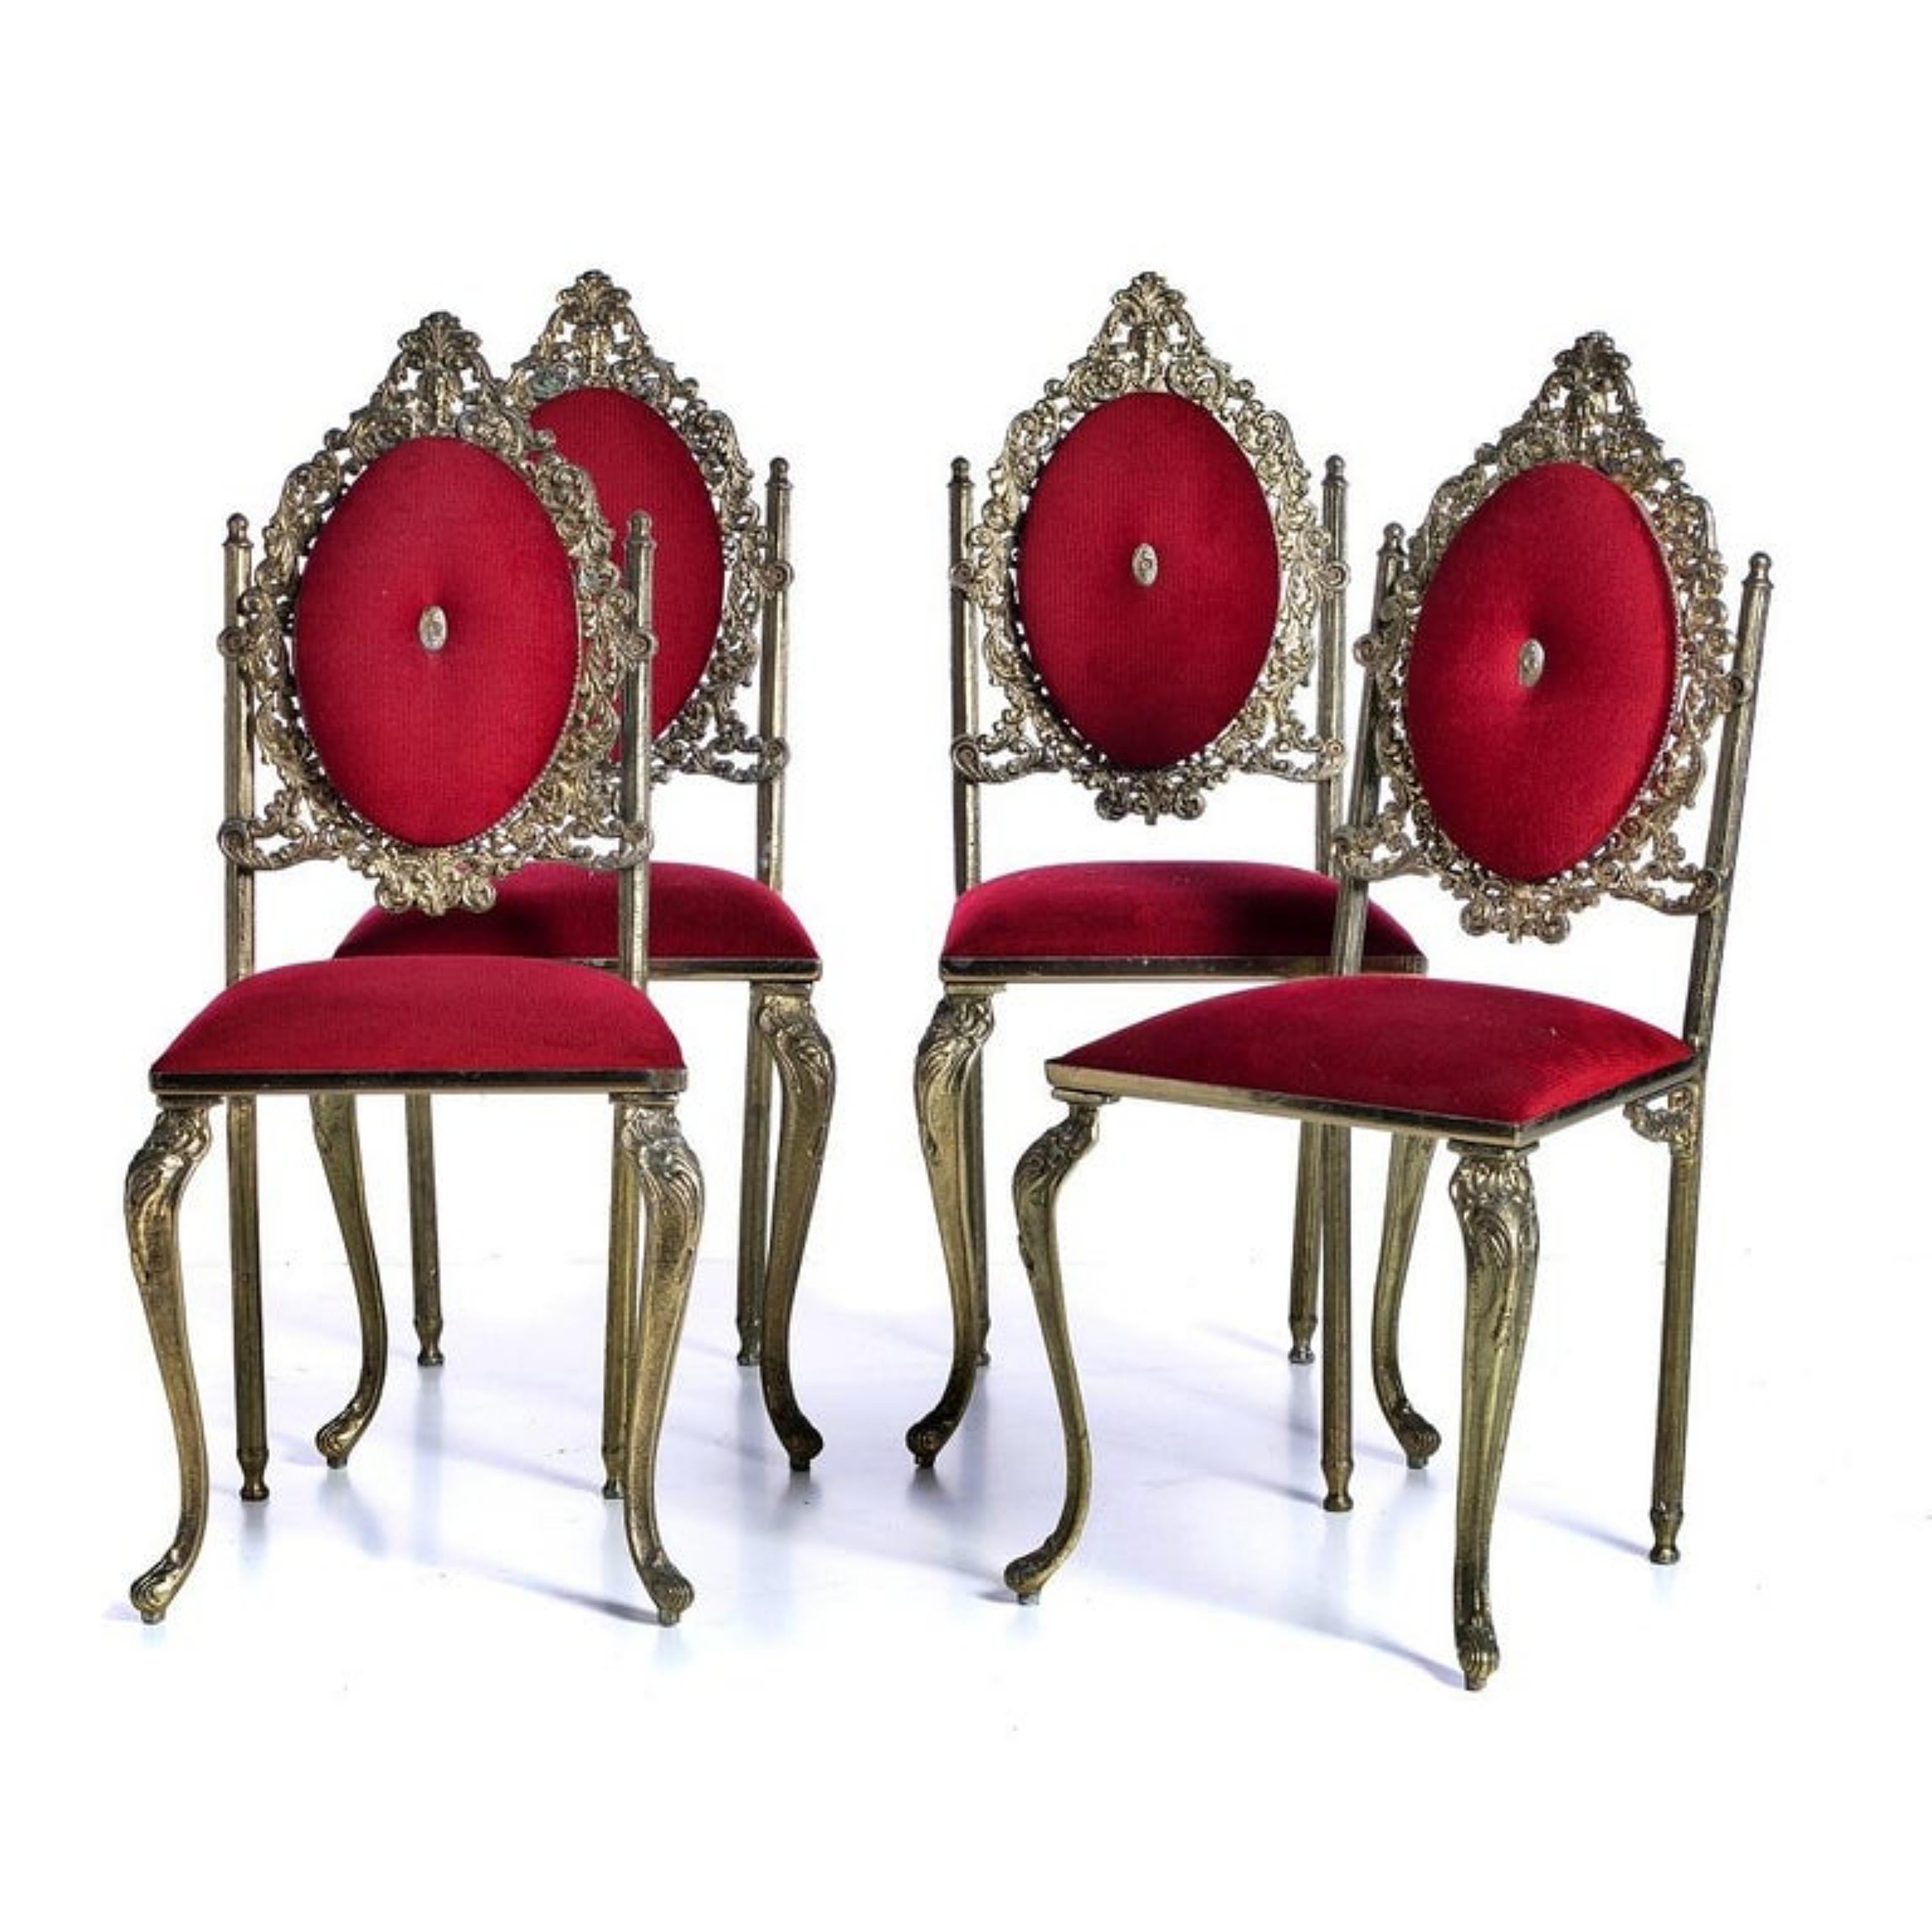 Eight German chairs
Of the 20th century
In gilded metal, decorated with plant motifs and masks.
Upholstered seats and back.
Signs of use. Dimensions: 96.5 x 45 x 42 cm.

THE PRICE IS FOR THE SET